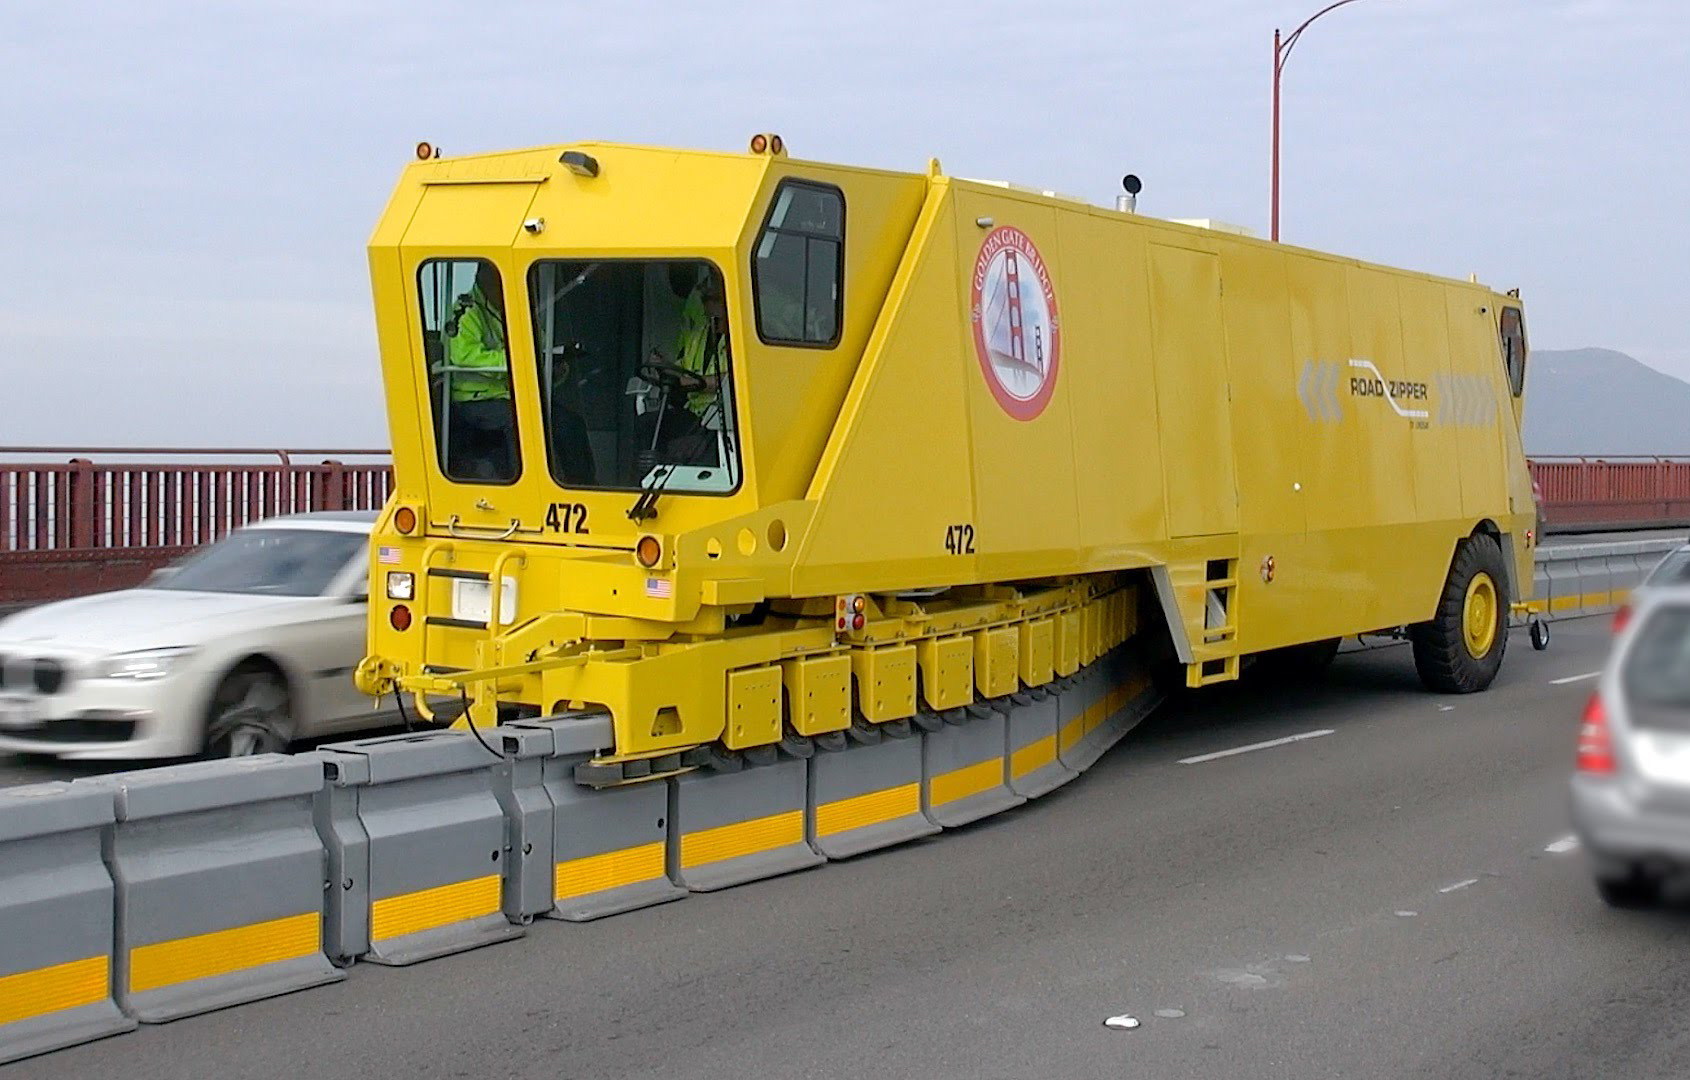 Changing Lanes: Watch Median Movers & Cone Collectors Rapidly Modify Roads  - 99% Invisible